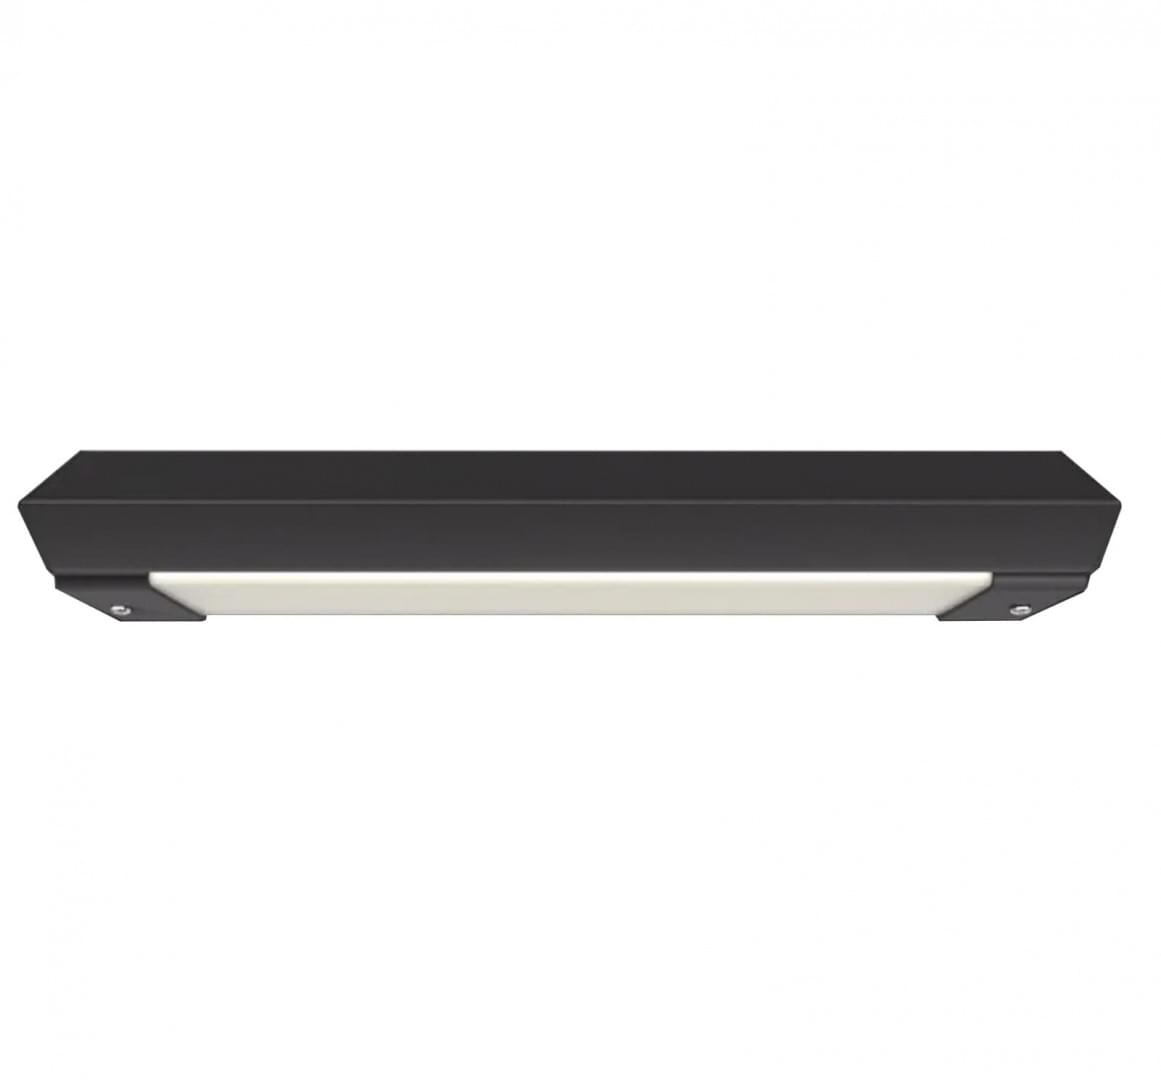 SV1.0 ECO Cornice IP66 from Dome Lighting Systems